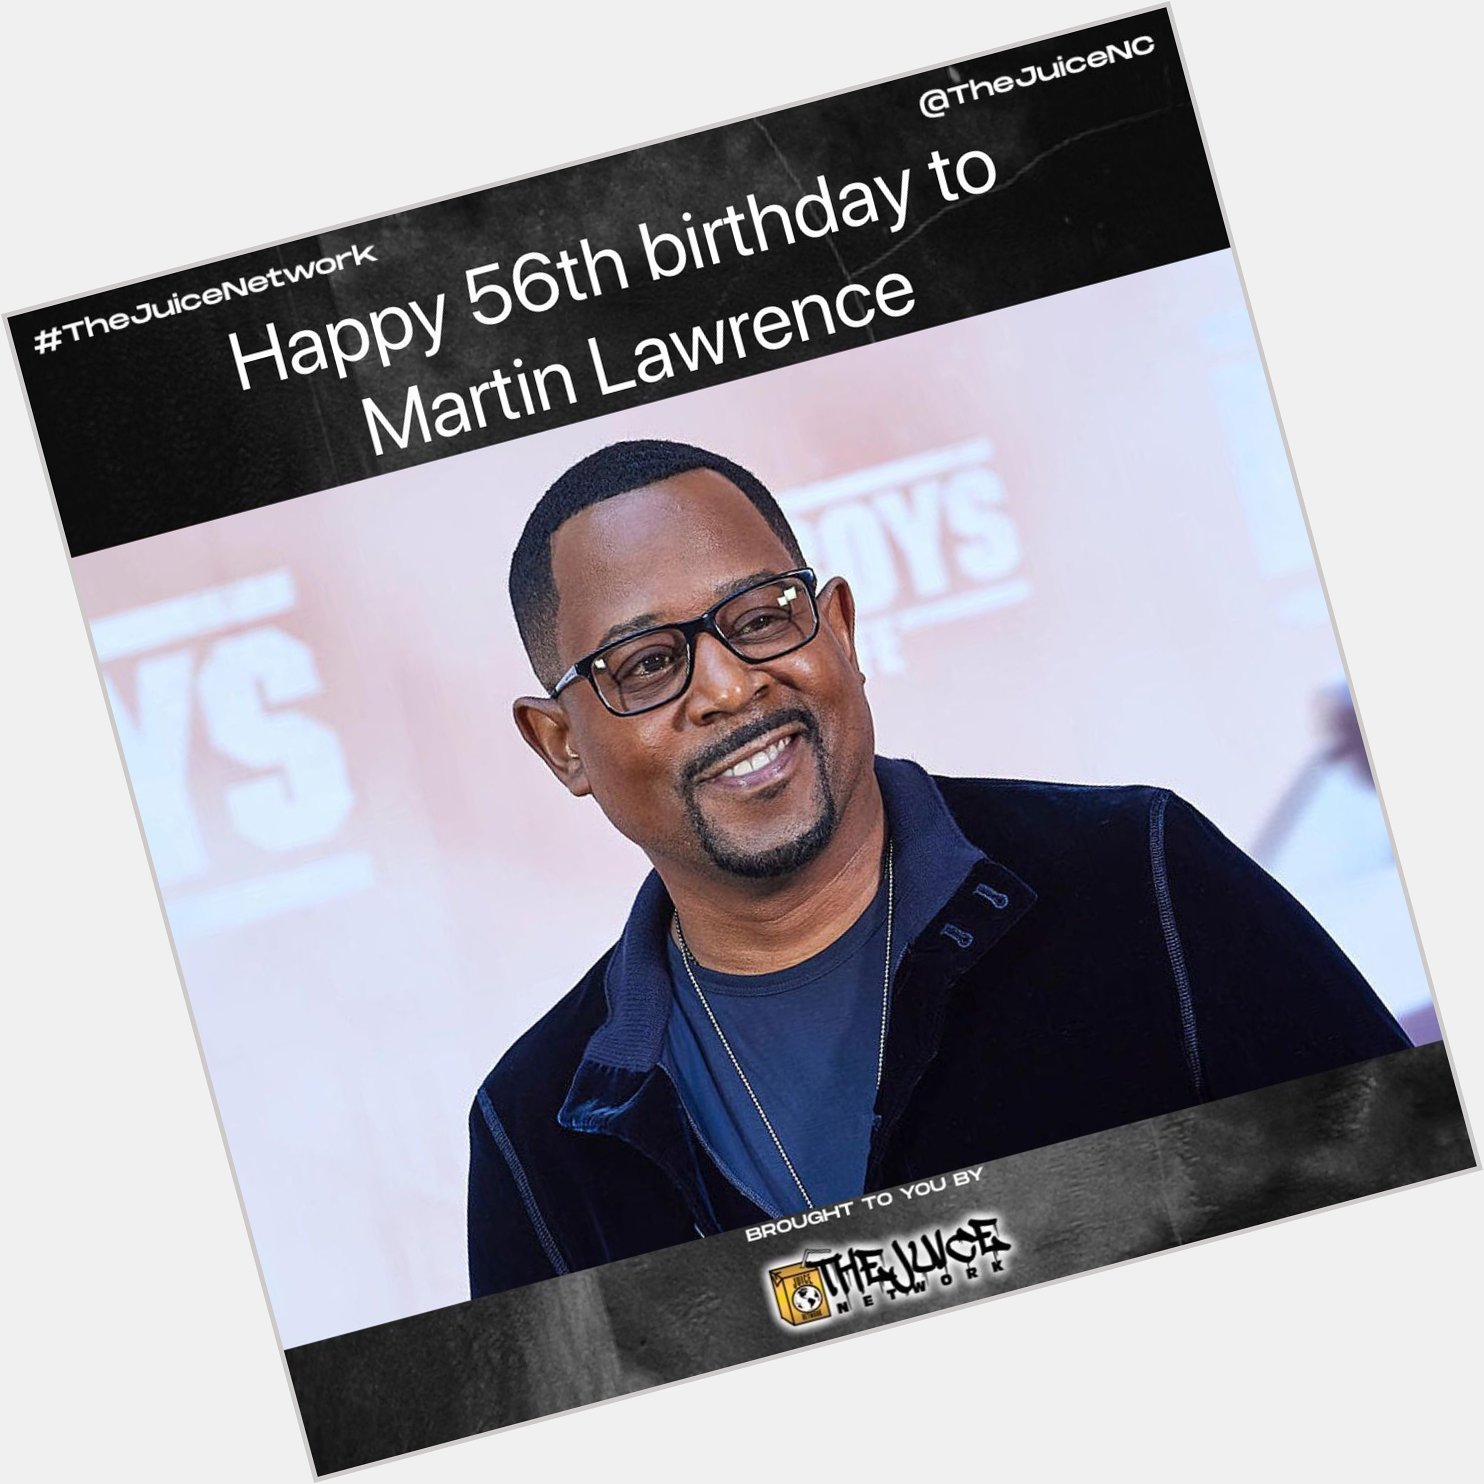 Happy 56th birthday to Martin Lawrence!    